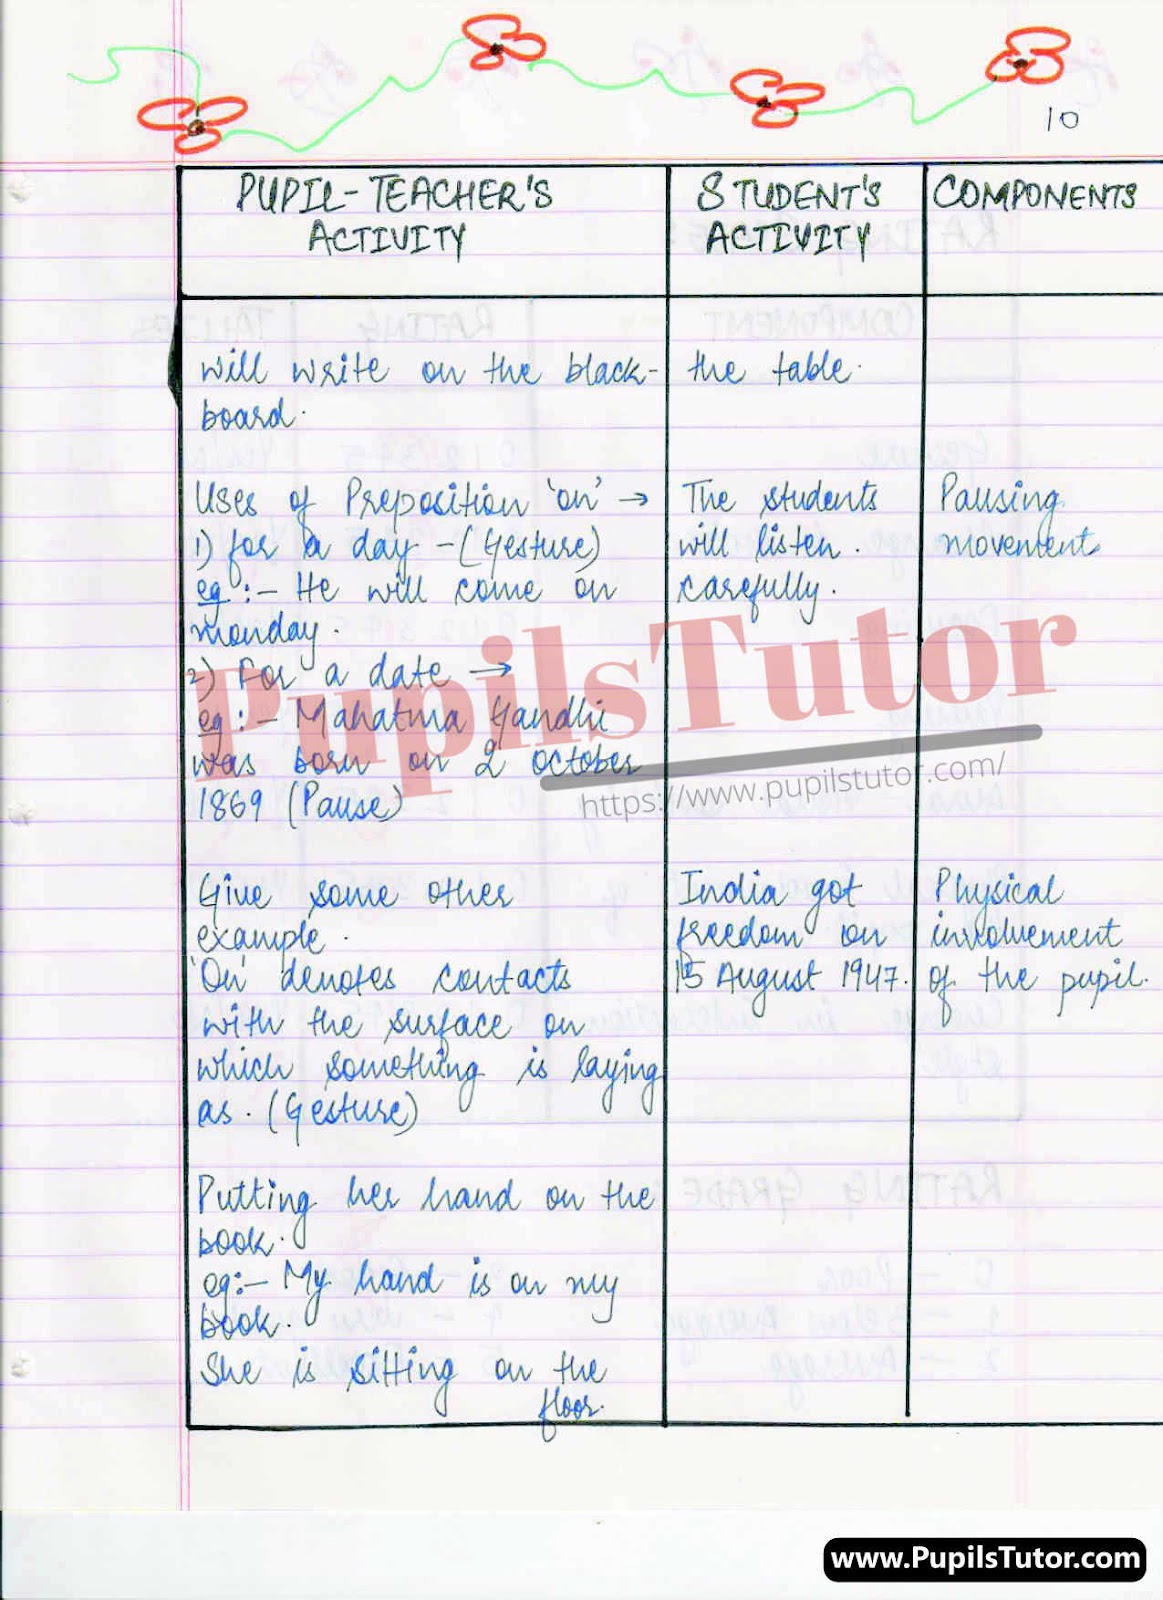 Class/Grade 4 To 8 English Microteaching Skill Of Introduction Lesson Plan On Prepositions For CBSE NCERT KVS School And University College Teachers – (Page And Image Number 3) – www.pupilstutor.com